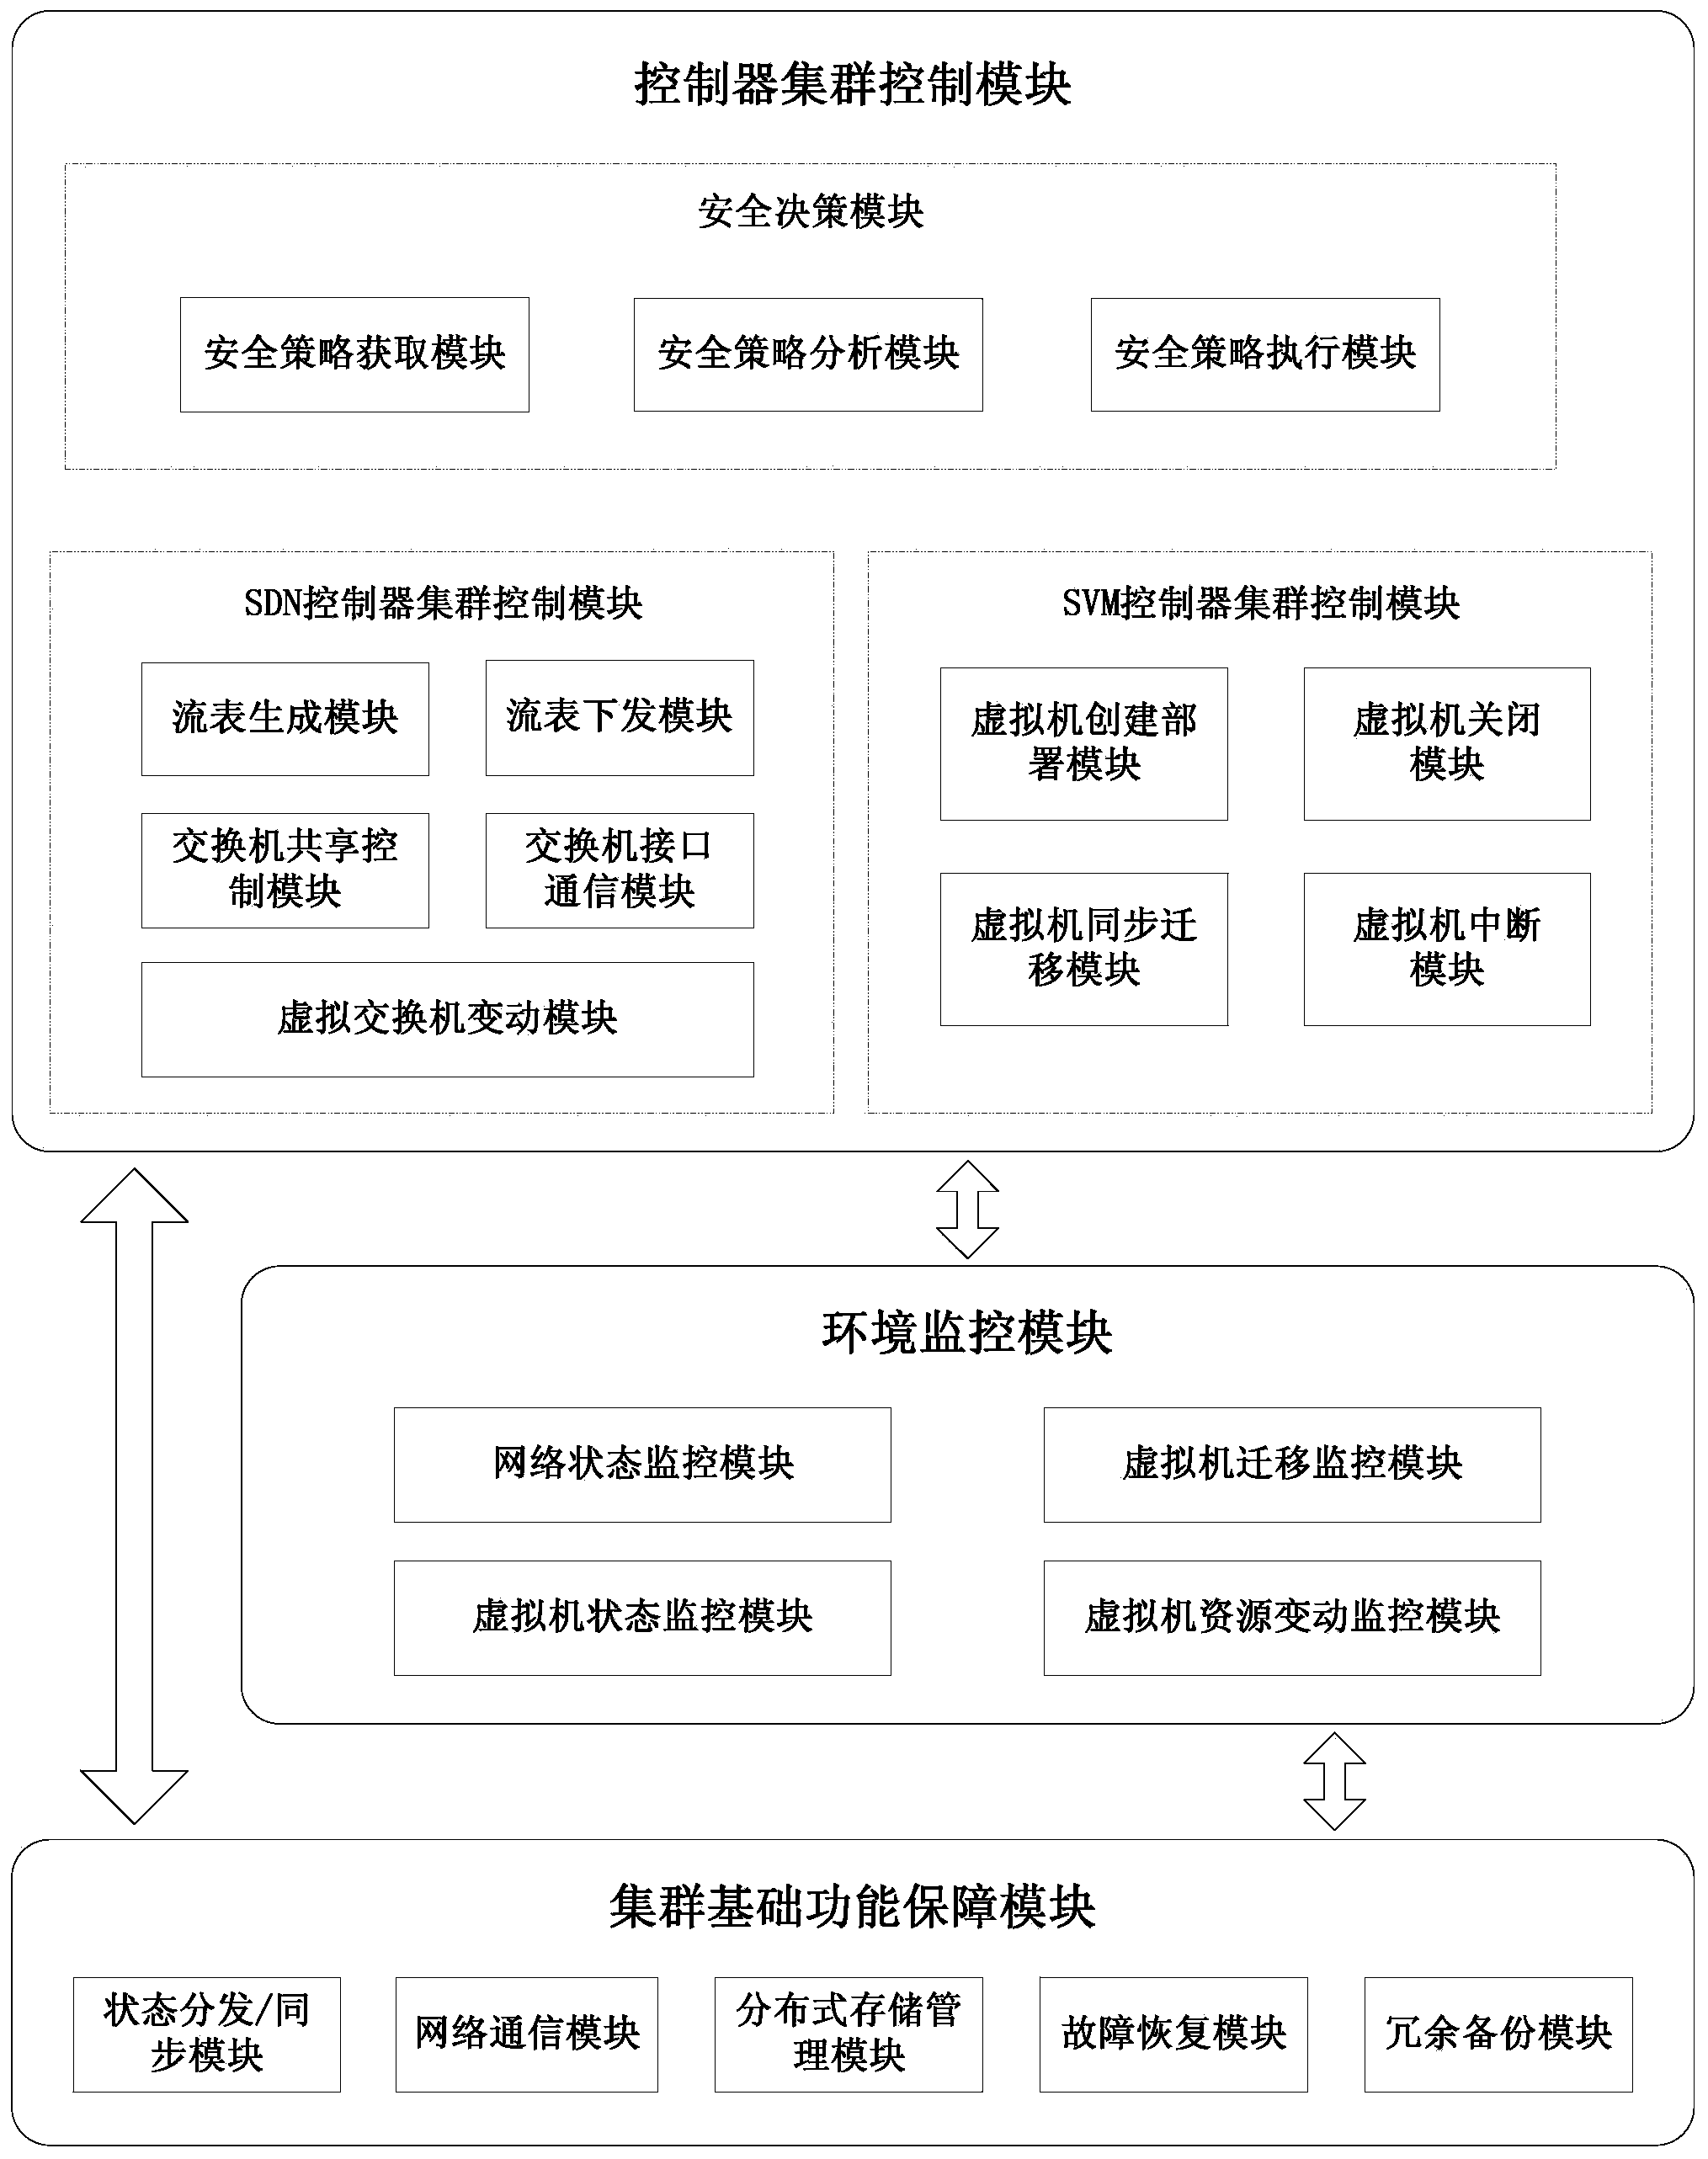 Cloud computing safety protection system and method based on SDN